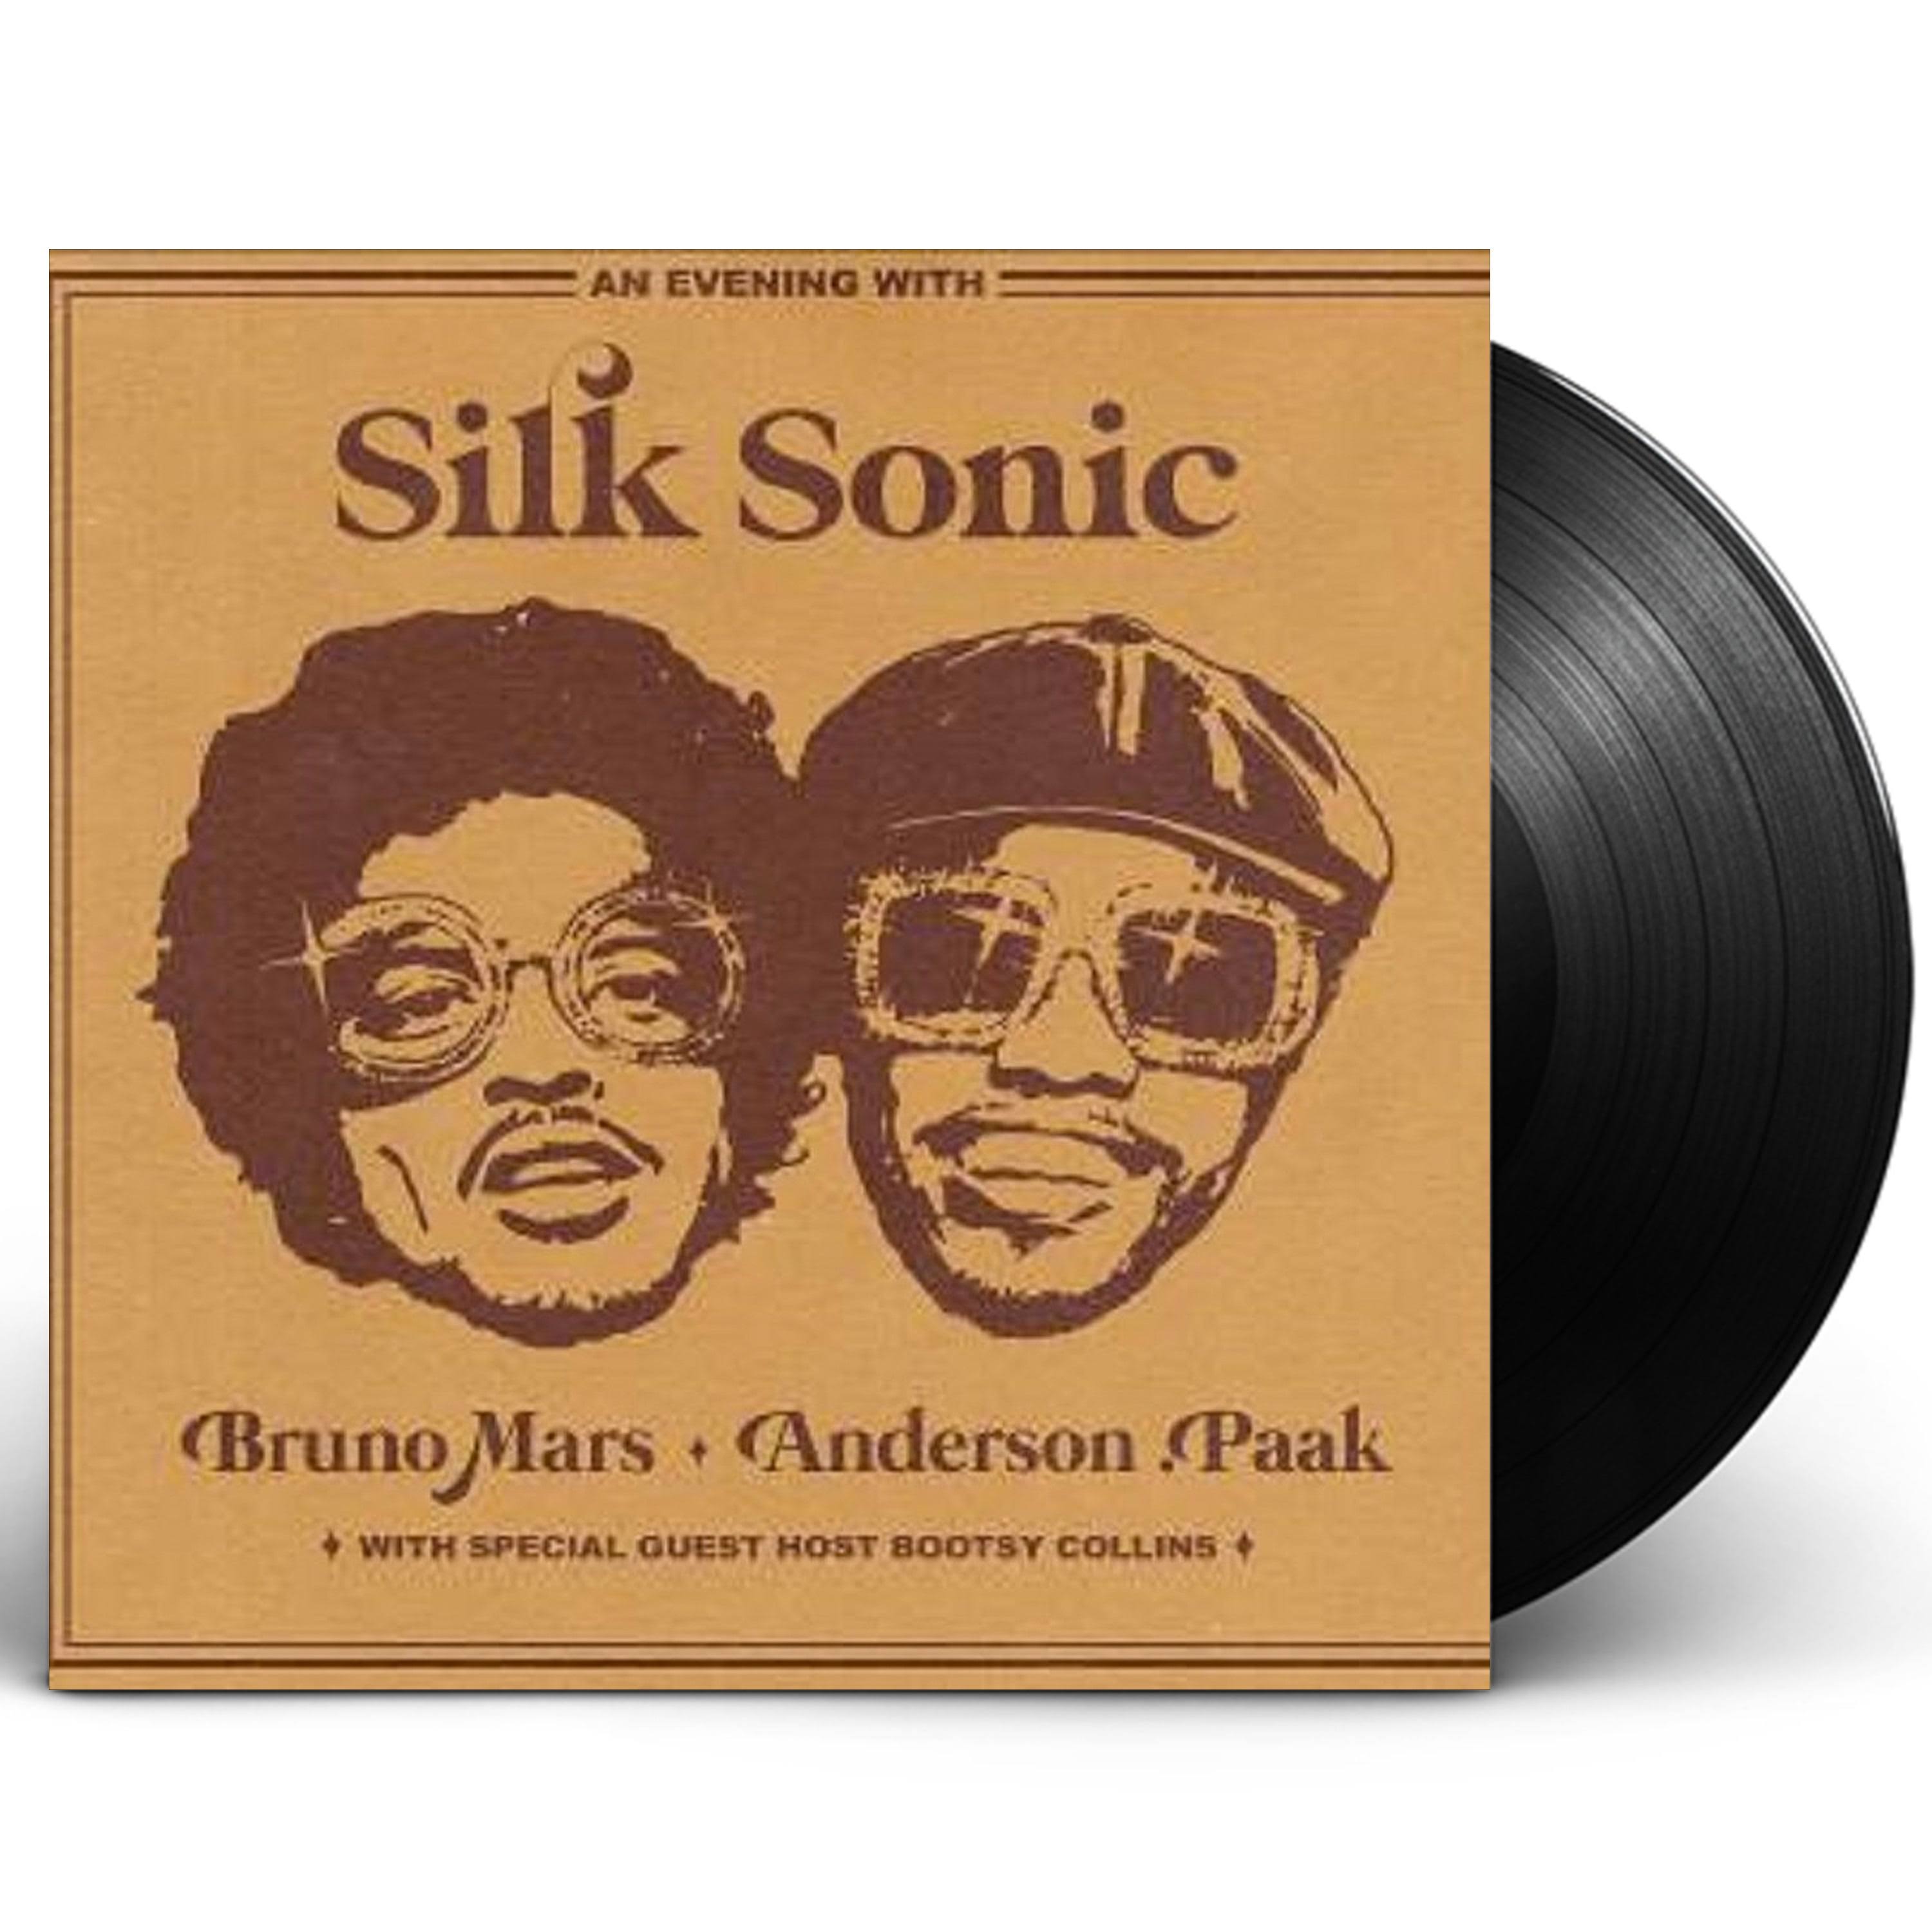 Anderson Mars Silk .Paak Sonic - An Evening with Silk Sonic